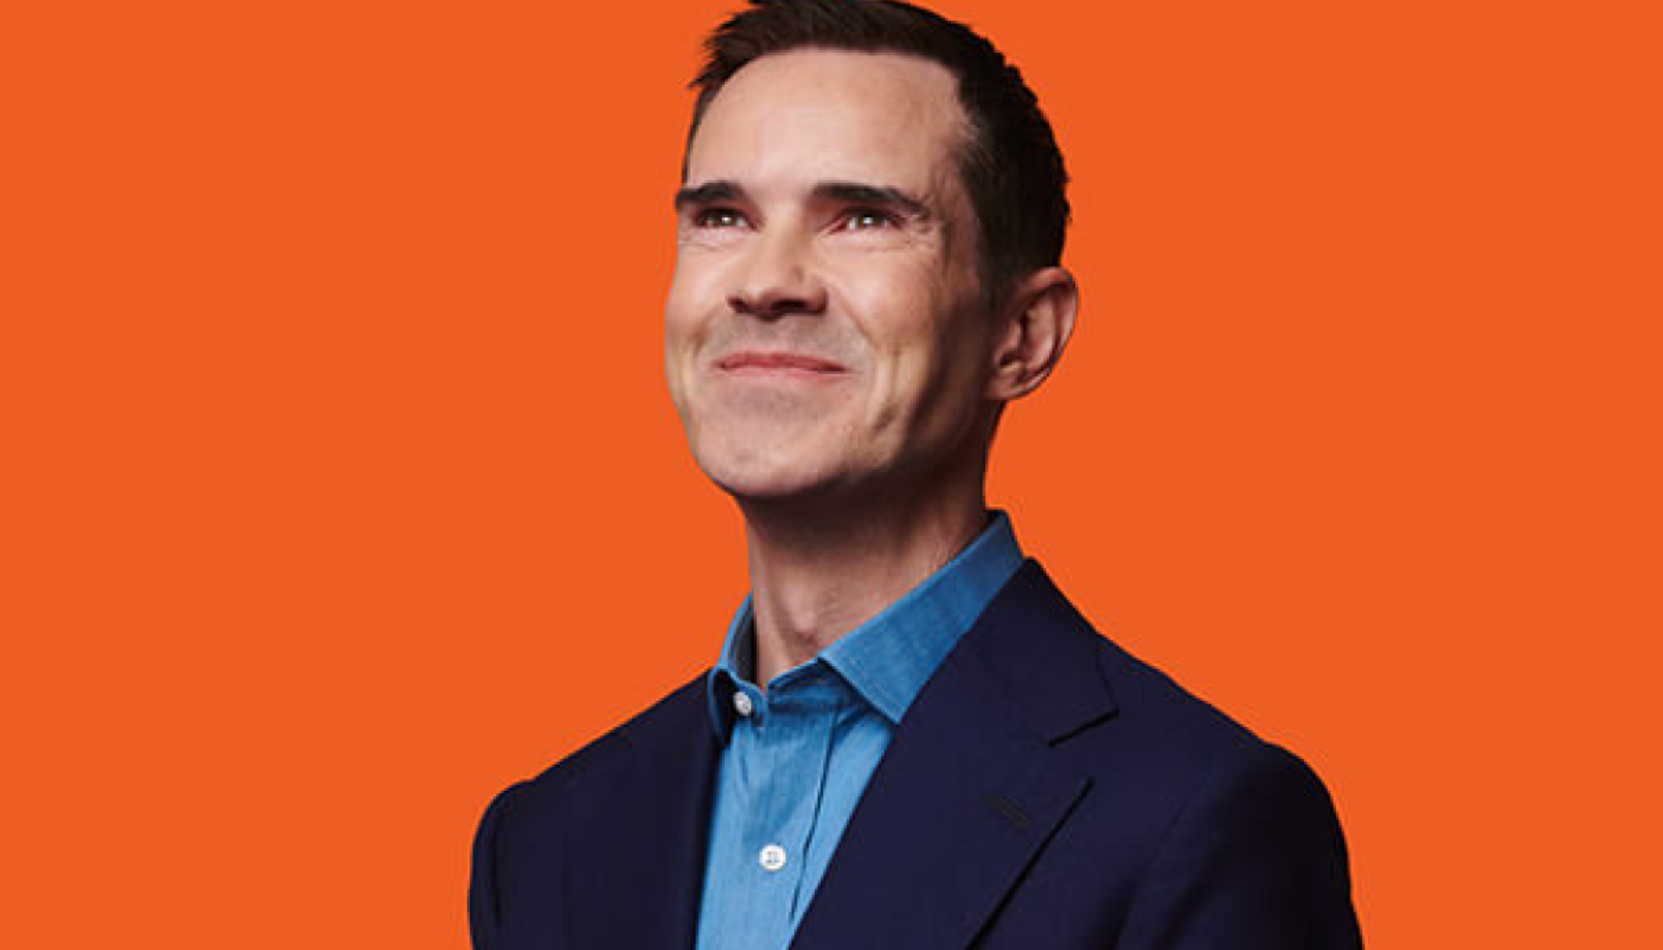 guide to surrey, guide to whats one, jimmy carr, G live, guildford, comedy, stand-up comedy, whats on, move to surrey, things to do, that's entertainment,